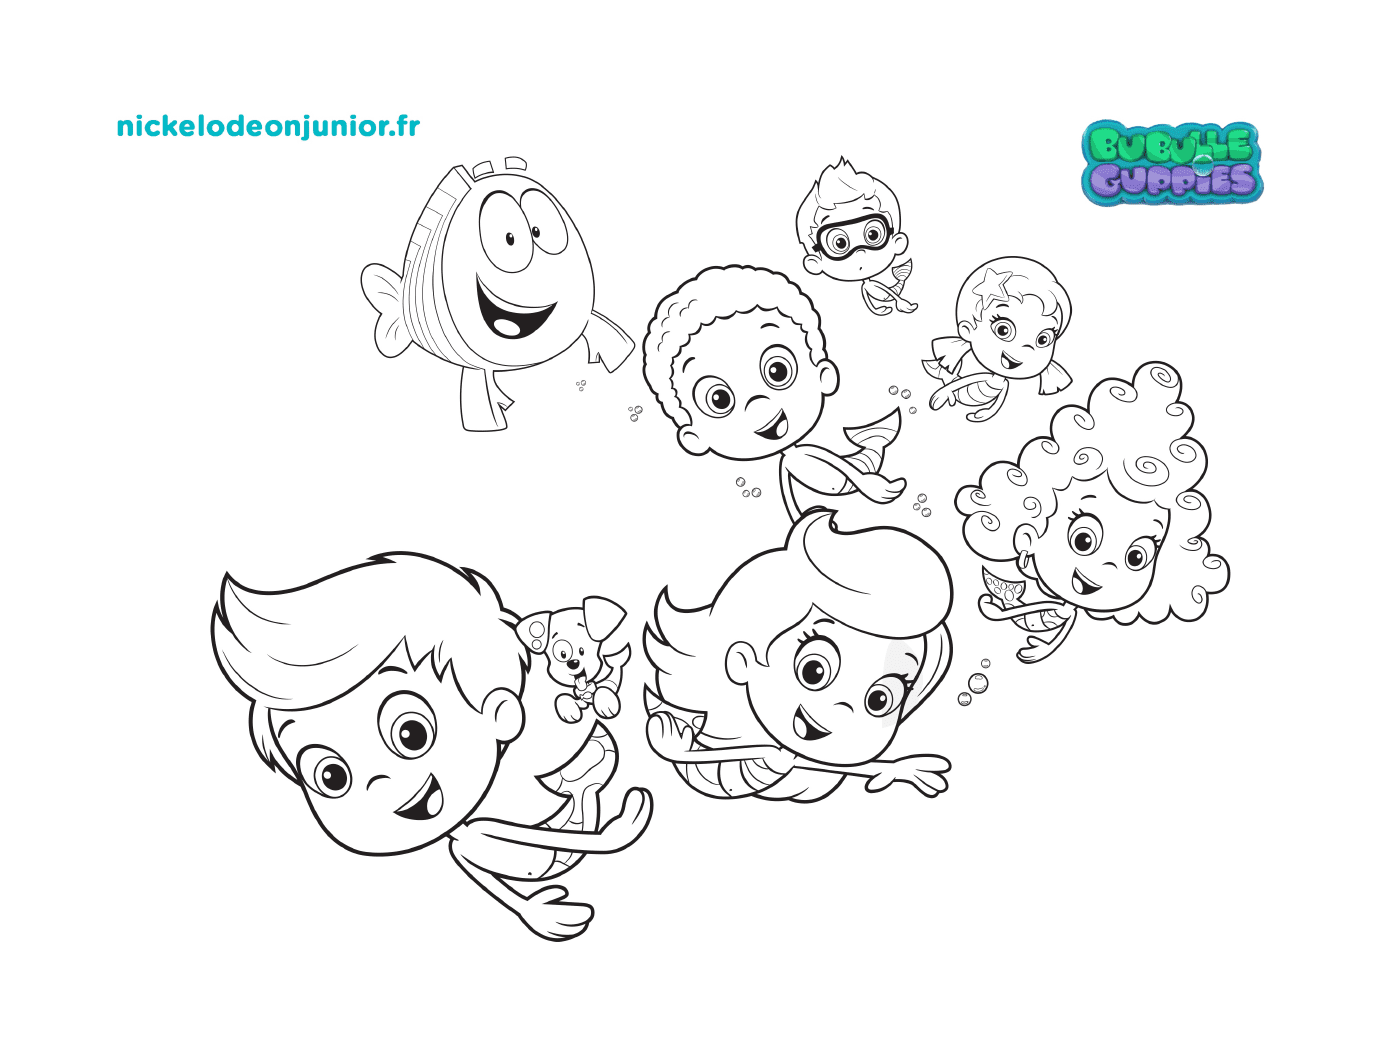  A multitude of Bubble Guppies in the ocean 